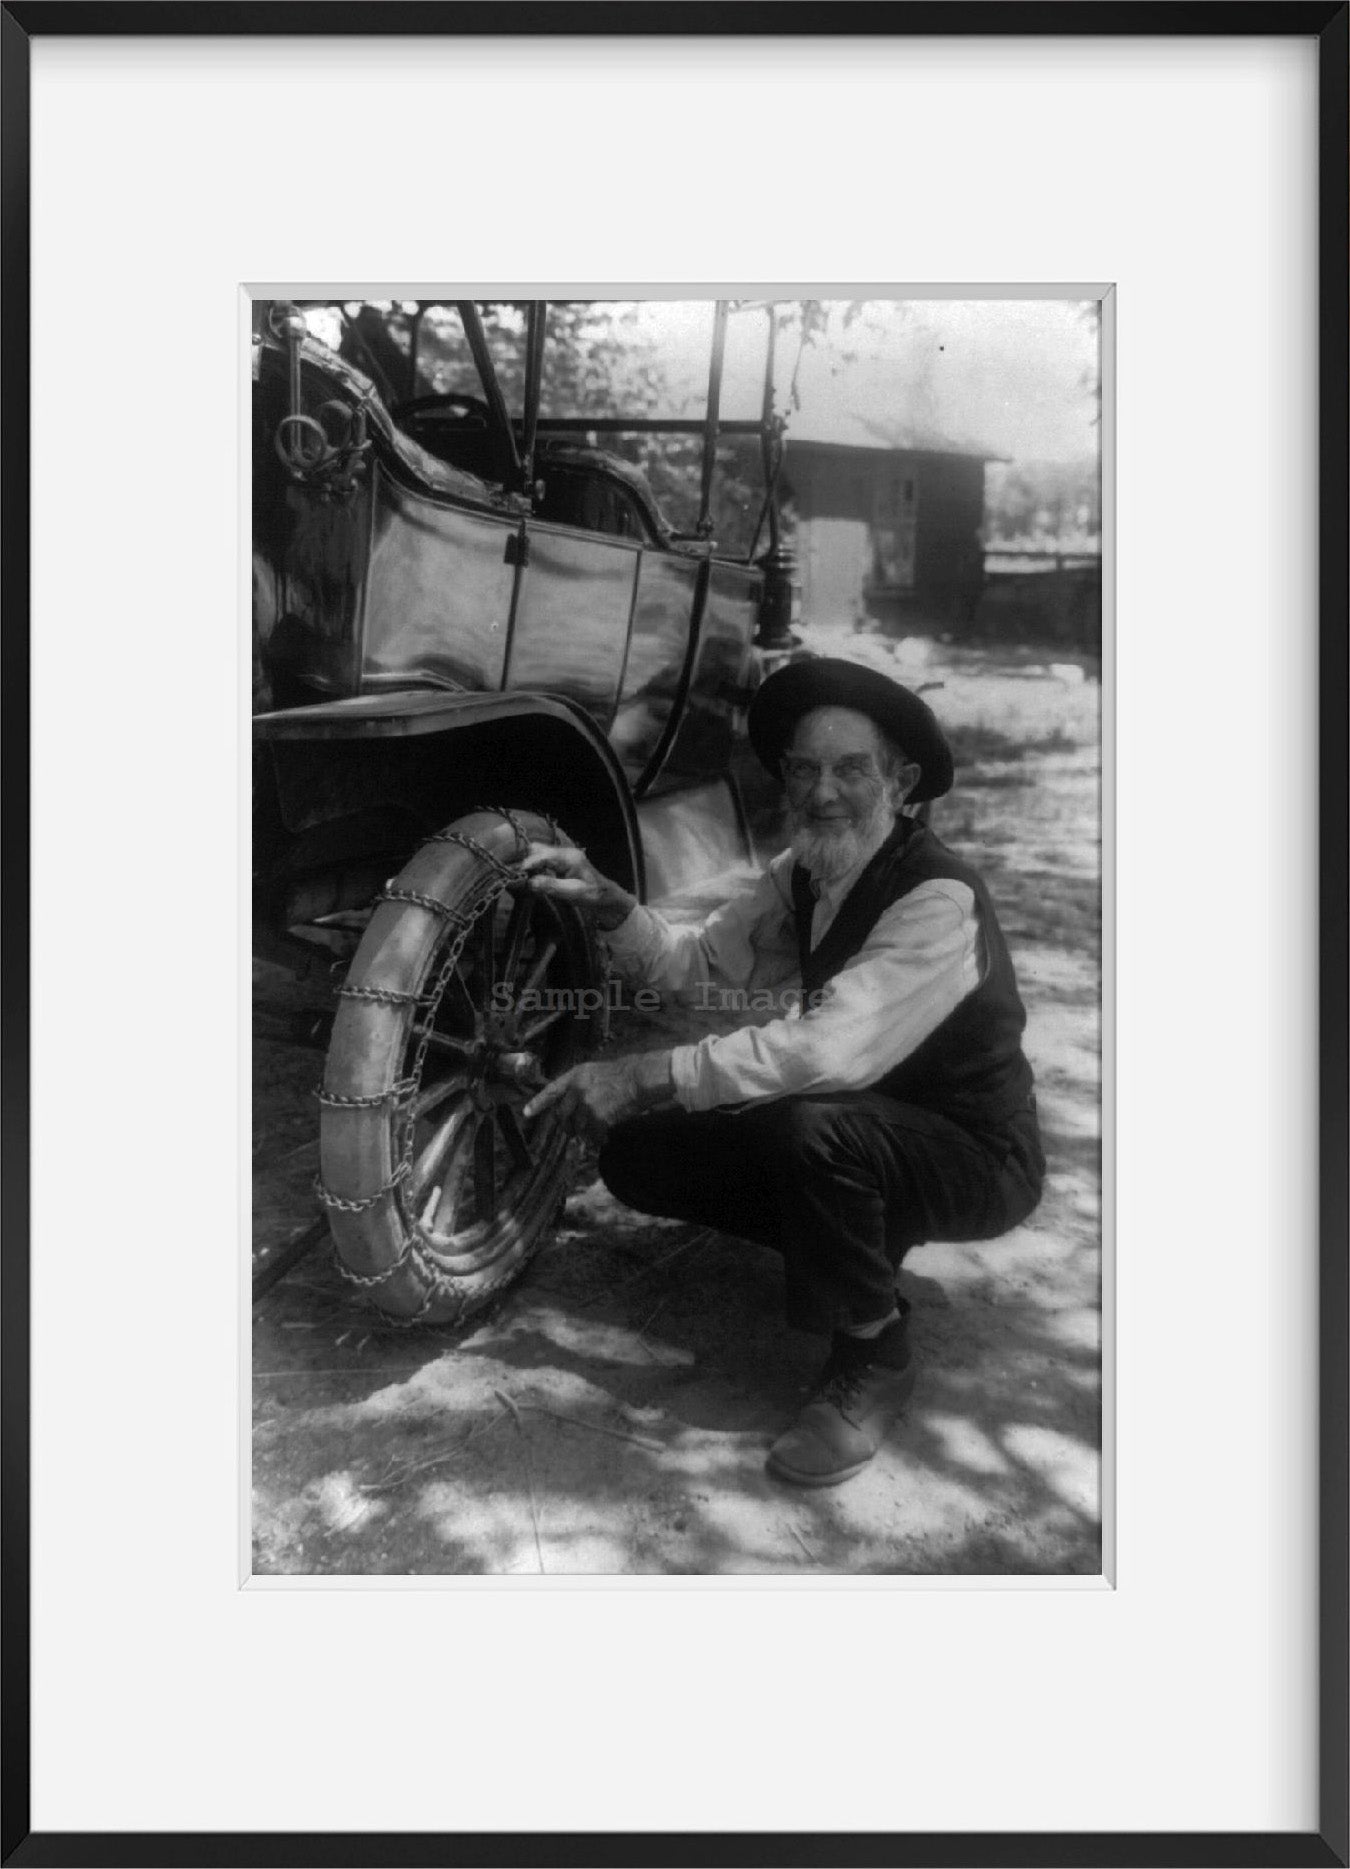 1913 Photo Safety no. 1389 Elderly man posed with automobile (Model T?) equipped